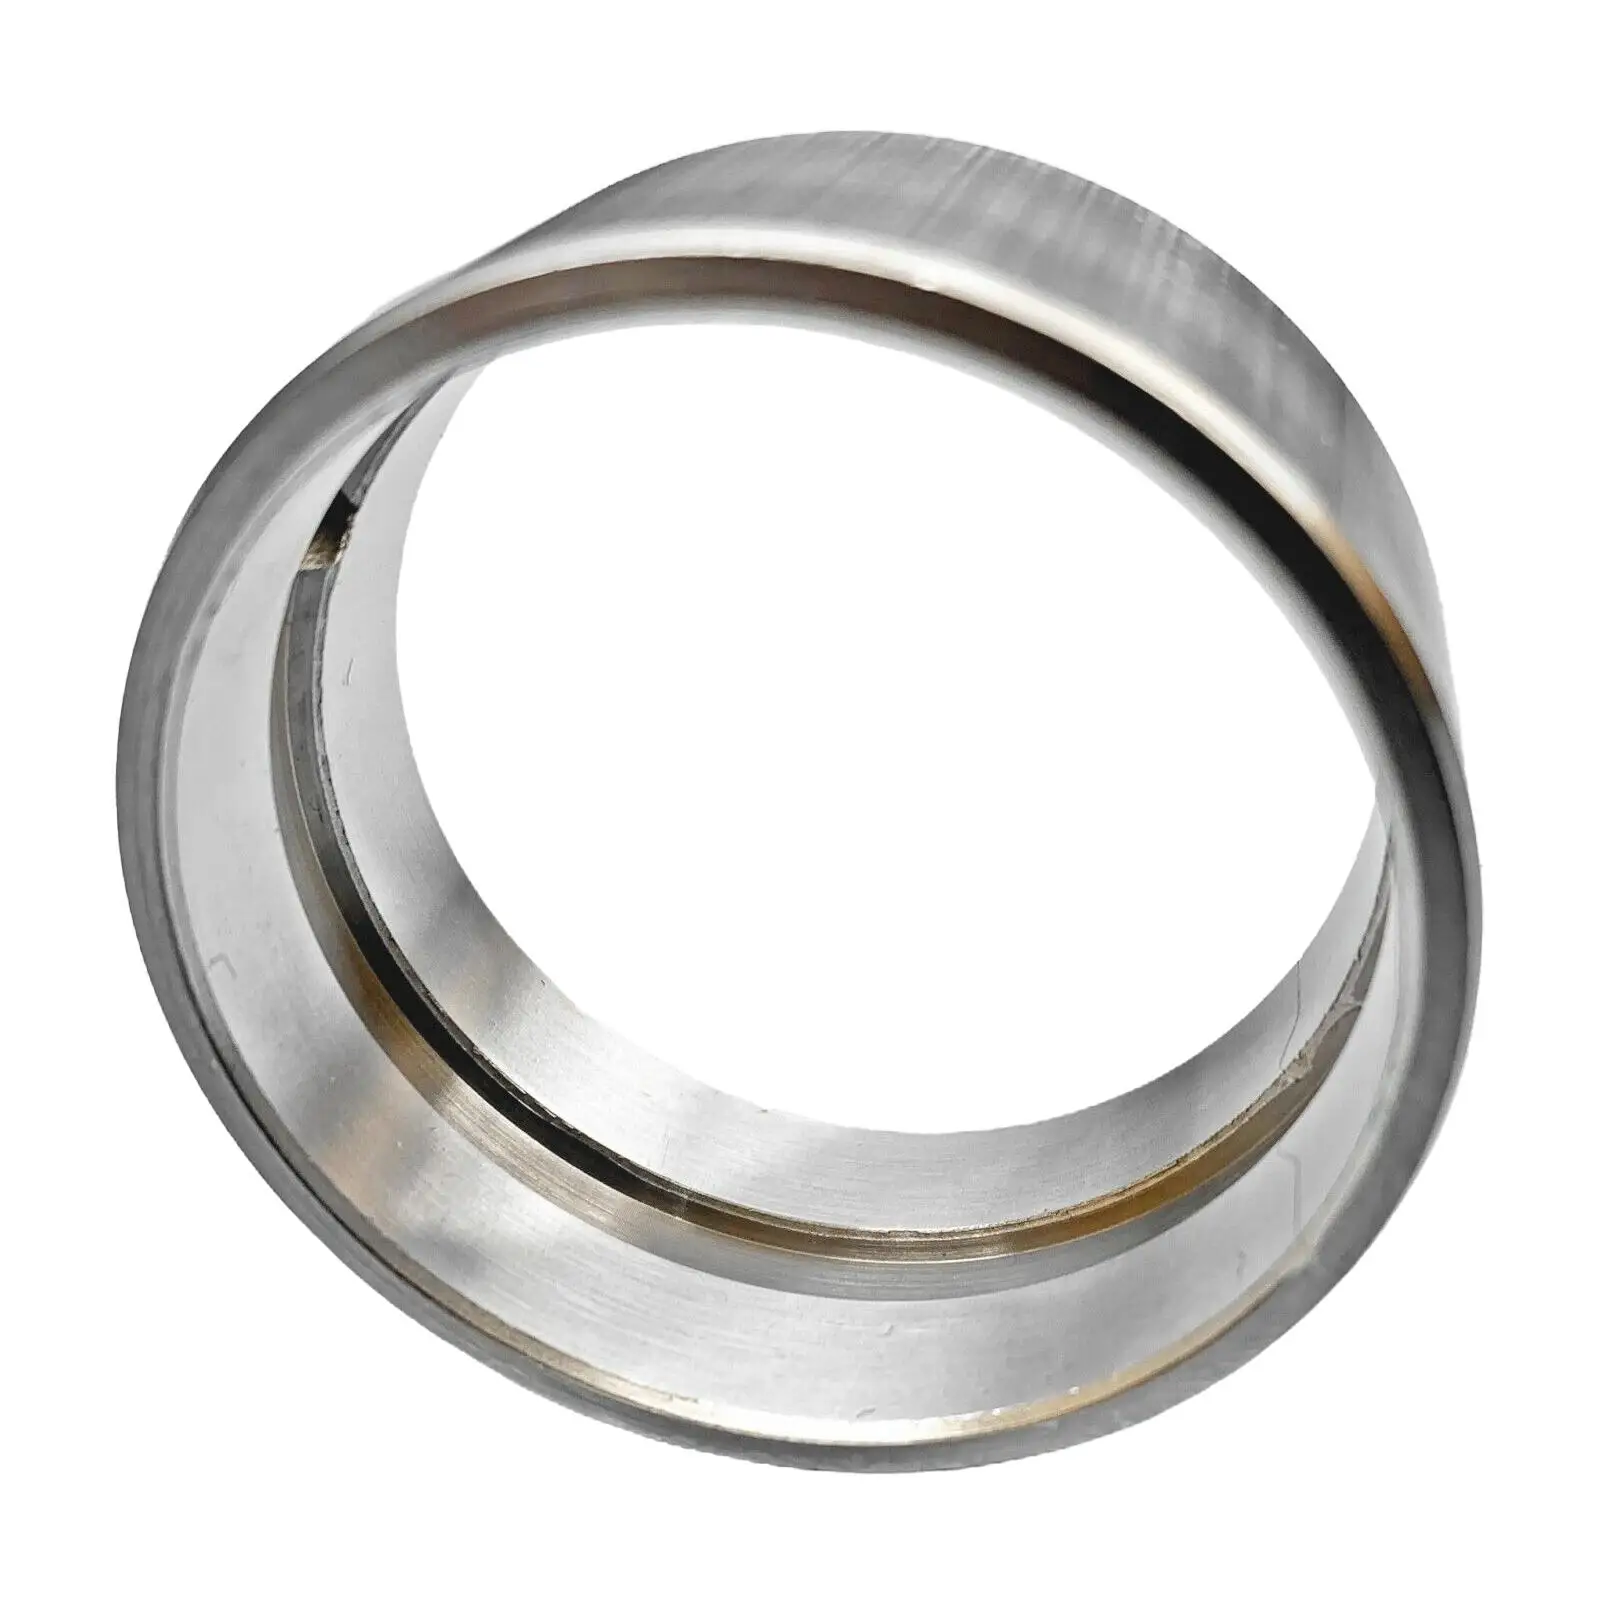 Crank Main Bearing Bushing Replaces for Polaris 450 Engines Accessory